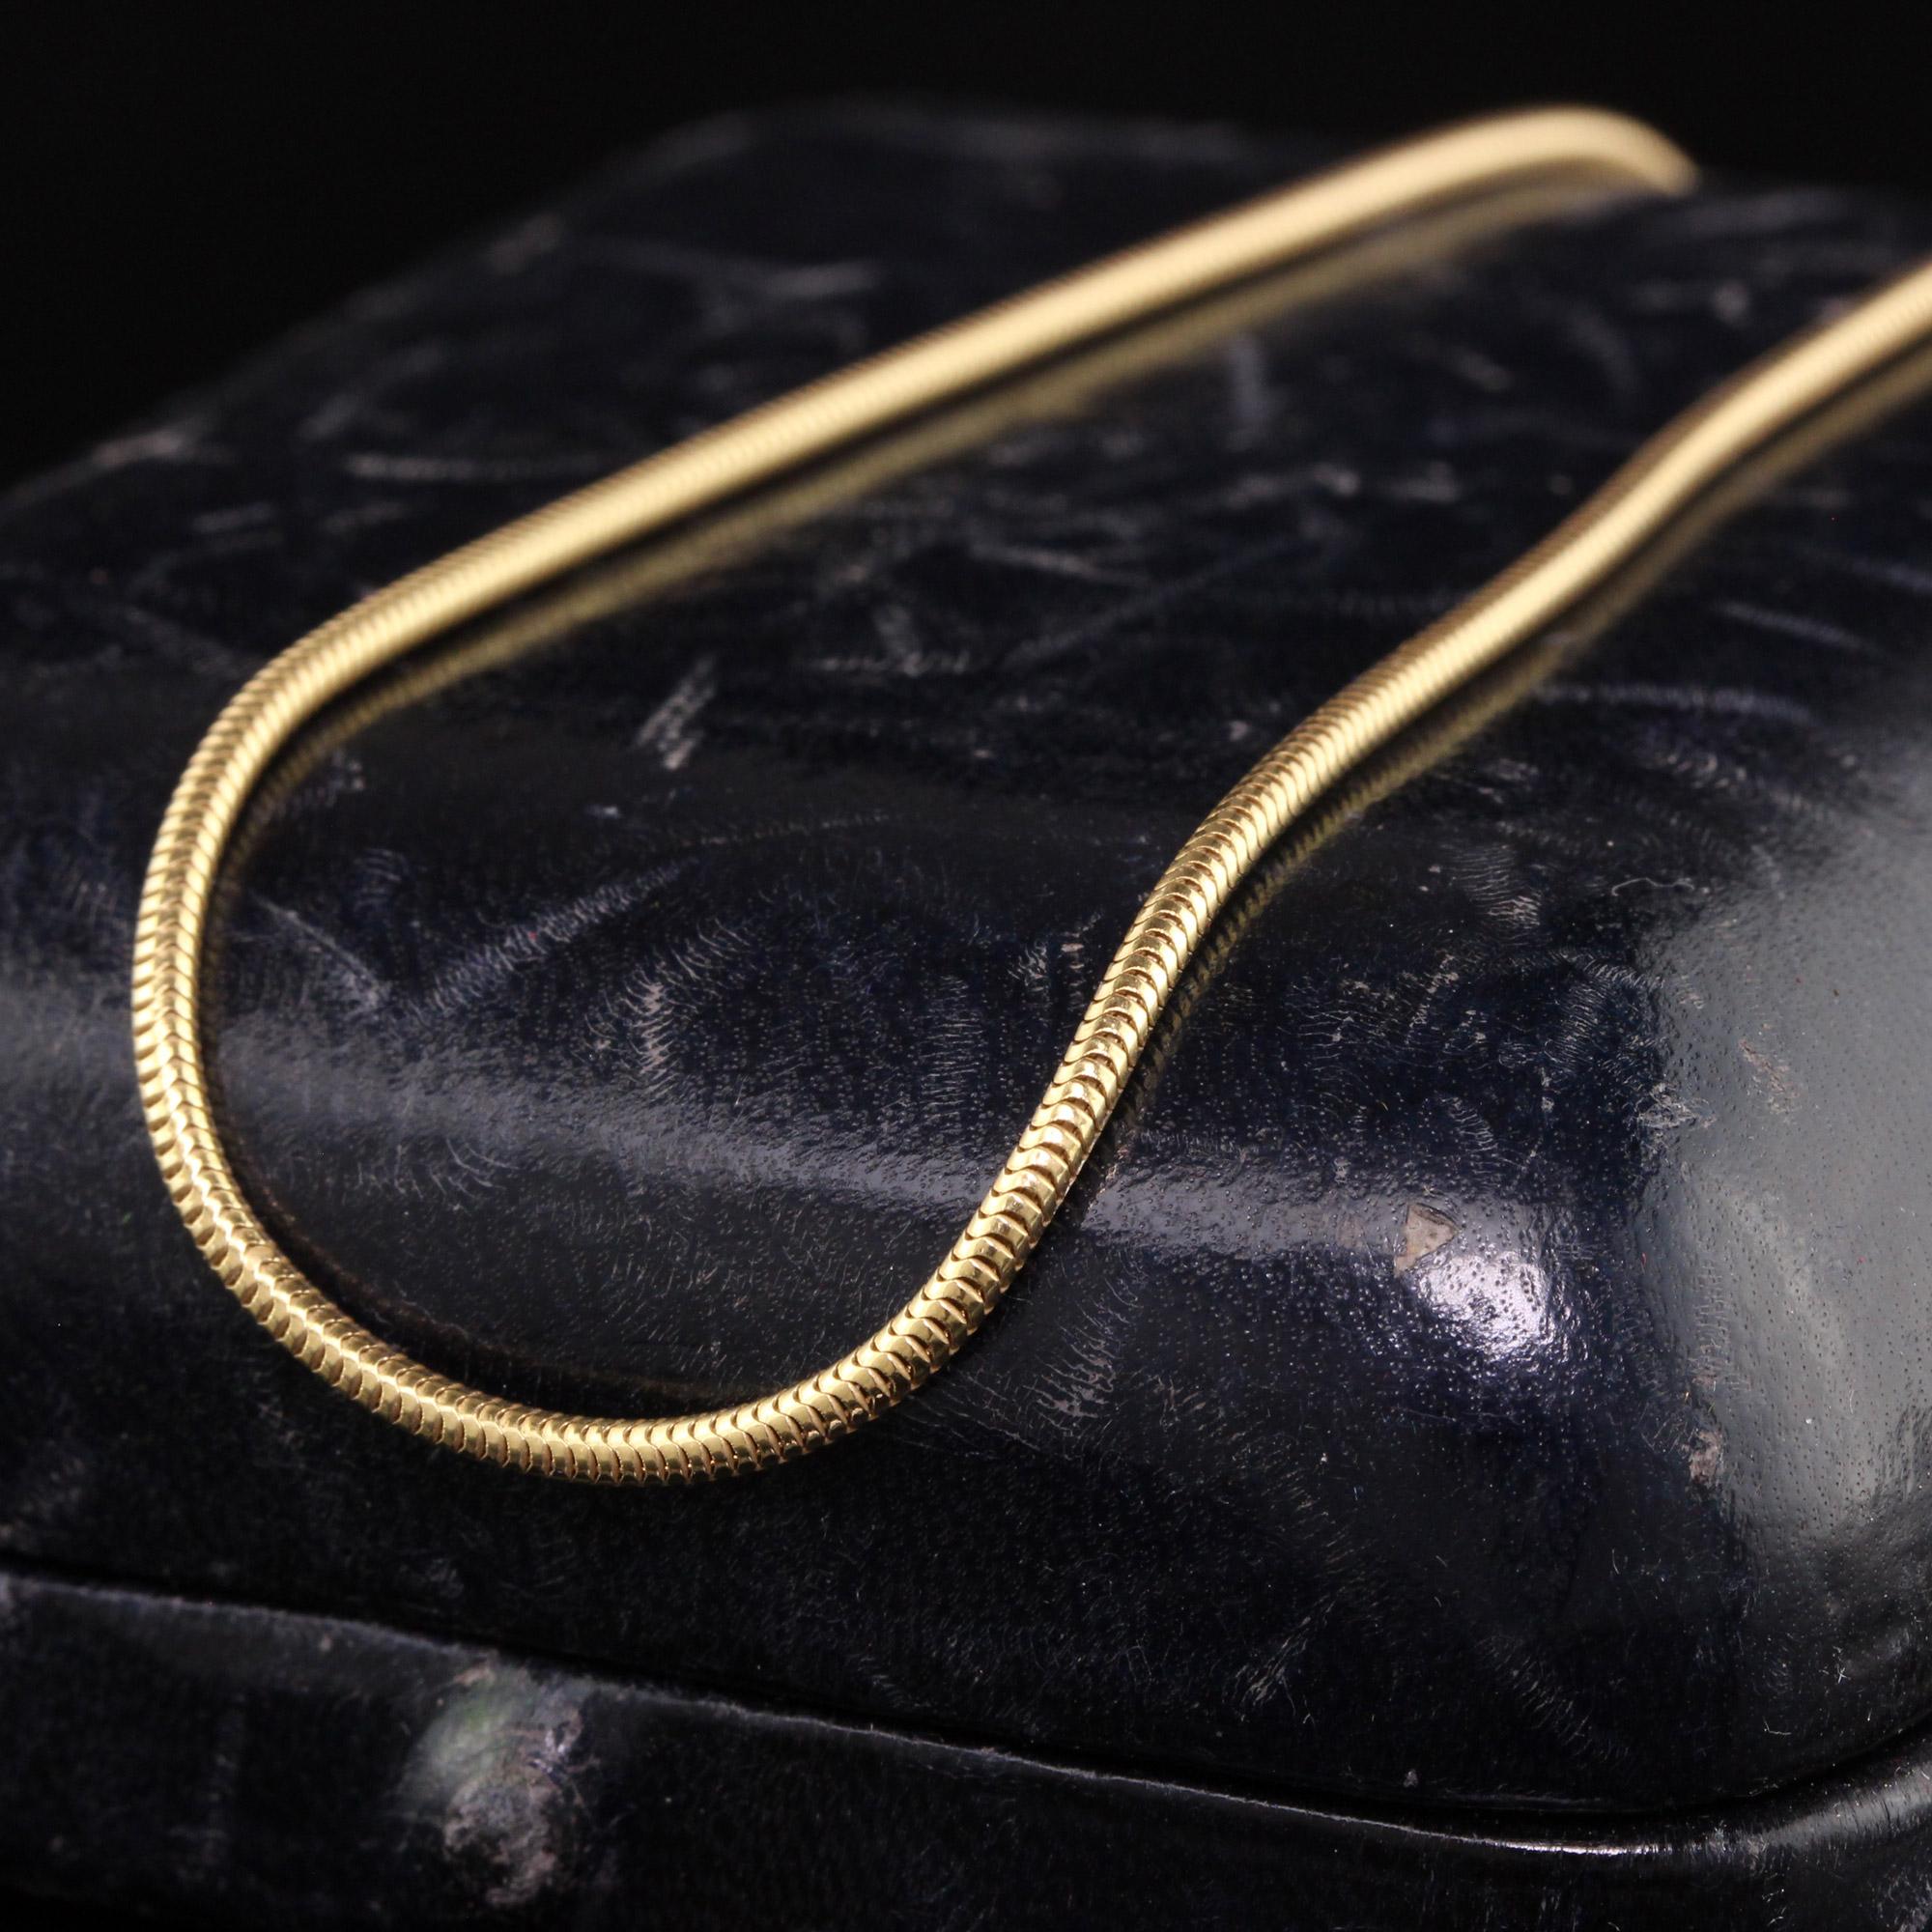 Beautiful Vintage Estate 14K Yellow Gold Snake Chain - 16 inches. This beautiful snake chain is in great condition with no damage and 16 inches long.

Item #N0067

Metal: 14K Yellow Gold

Weight: 6.7 Grams

Measurements: 16 inches long

Layaway: For